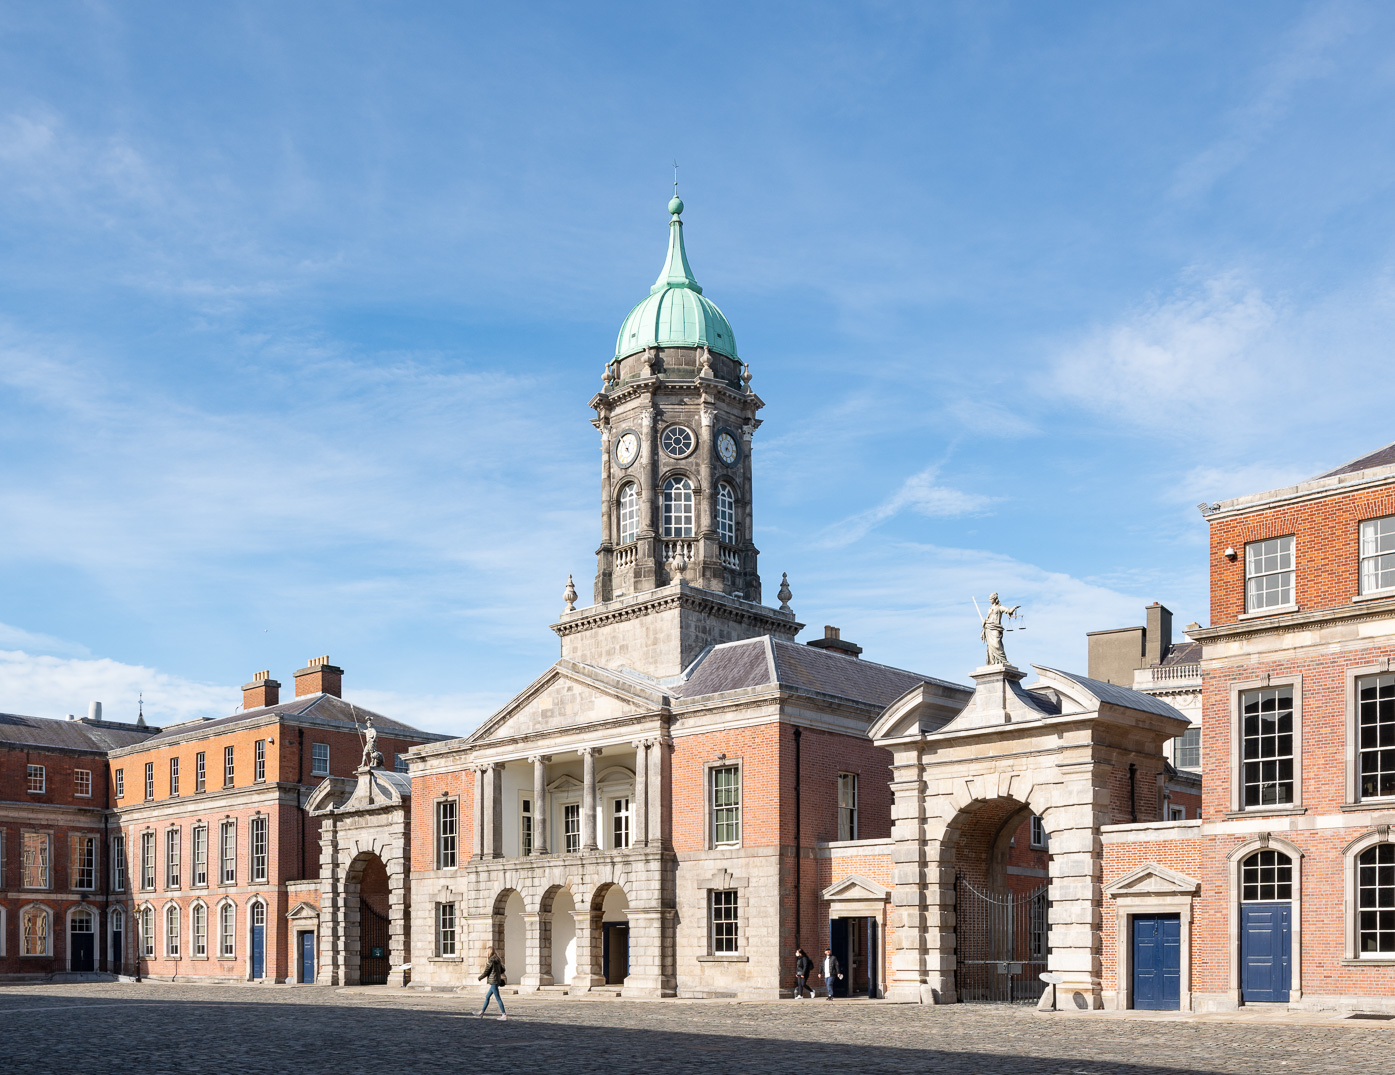 Outside view of Dublin Castle, a 13th century building with two archway entrances and round tower